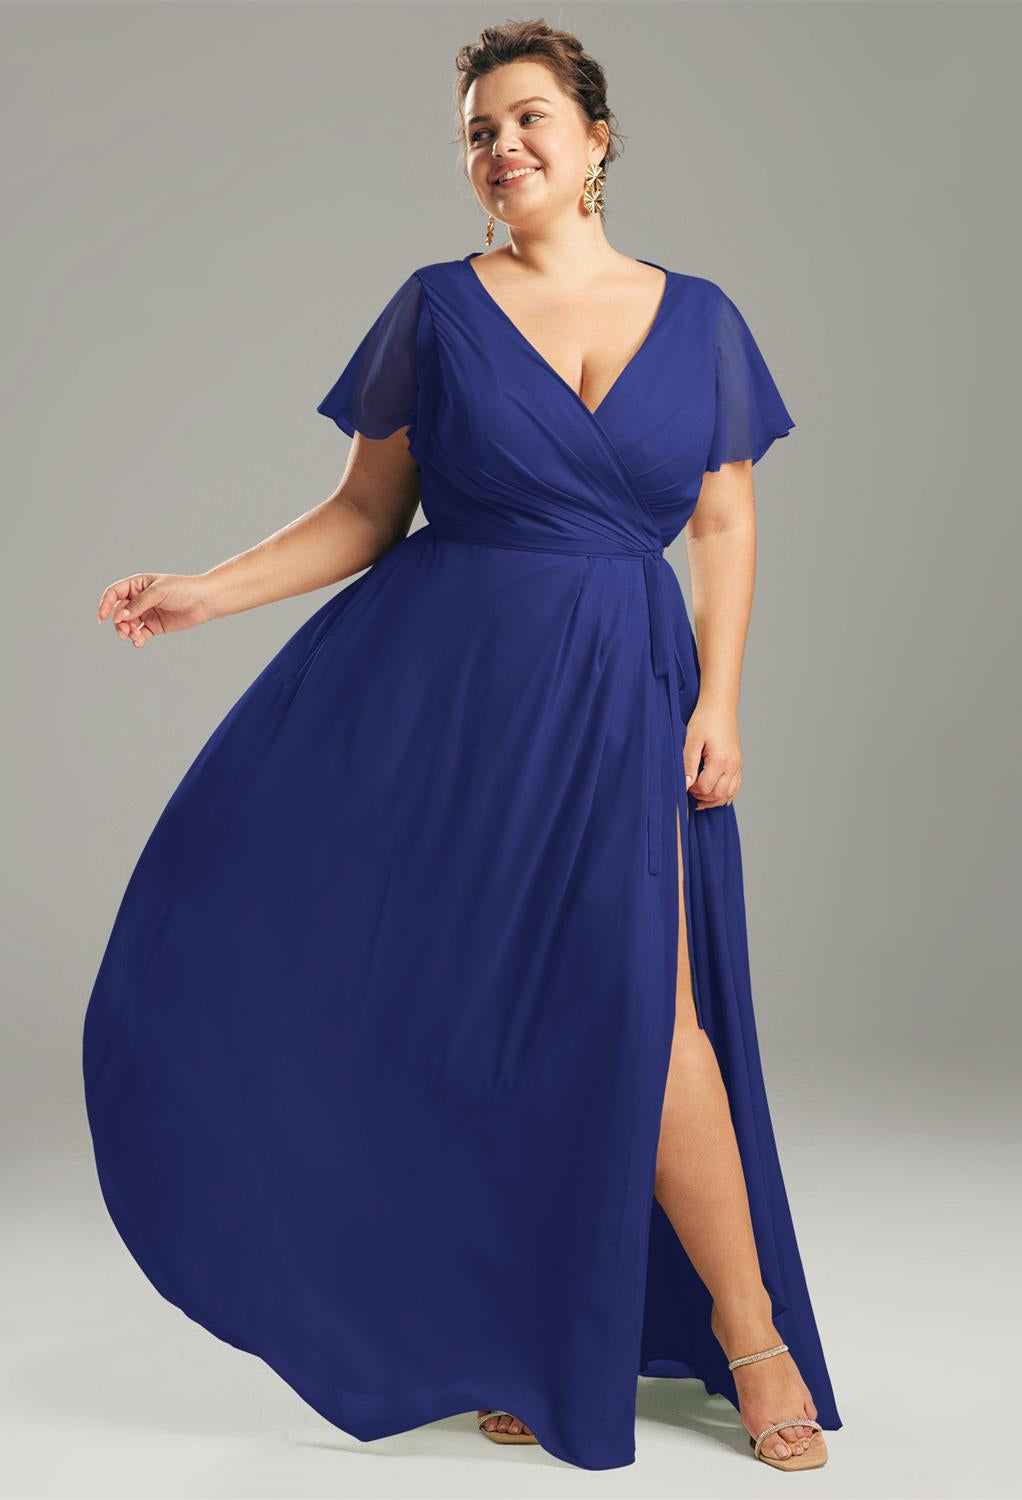 An Ellison - Chiffon Bridesmaid Dress - Off The Rack available at Bergamot Bridal, a bridal shop in London, with a v-neck and slit.